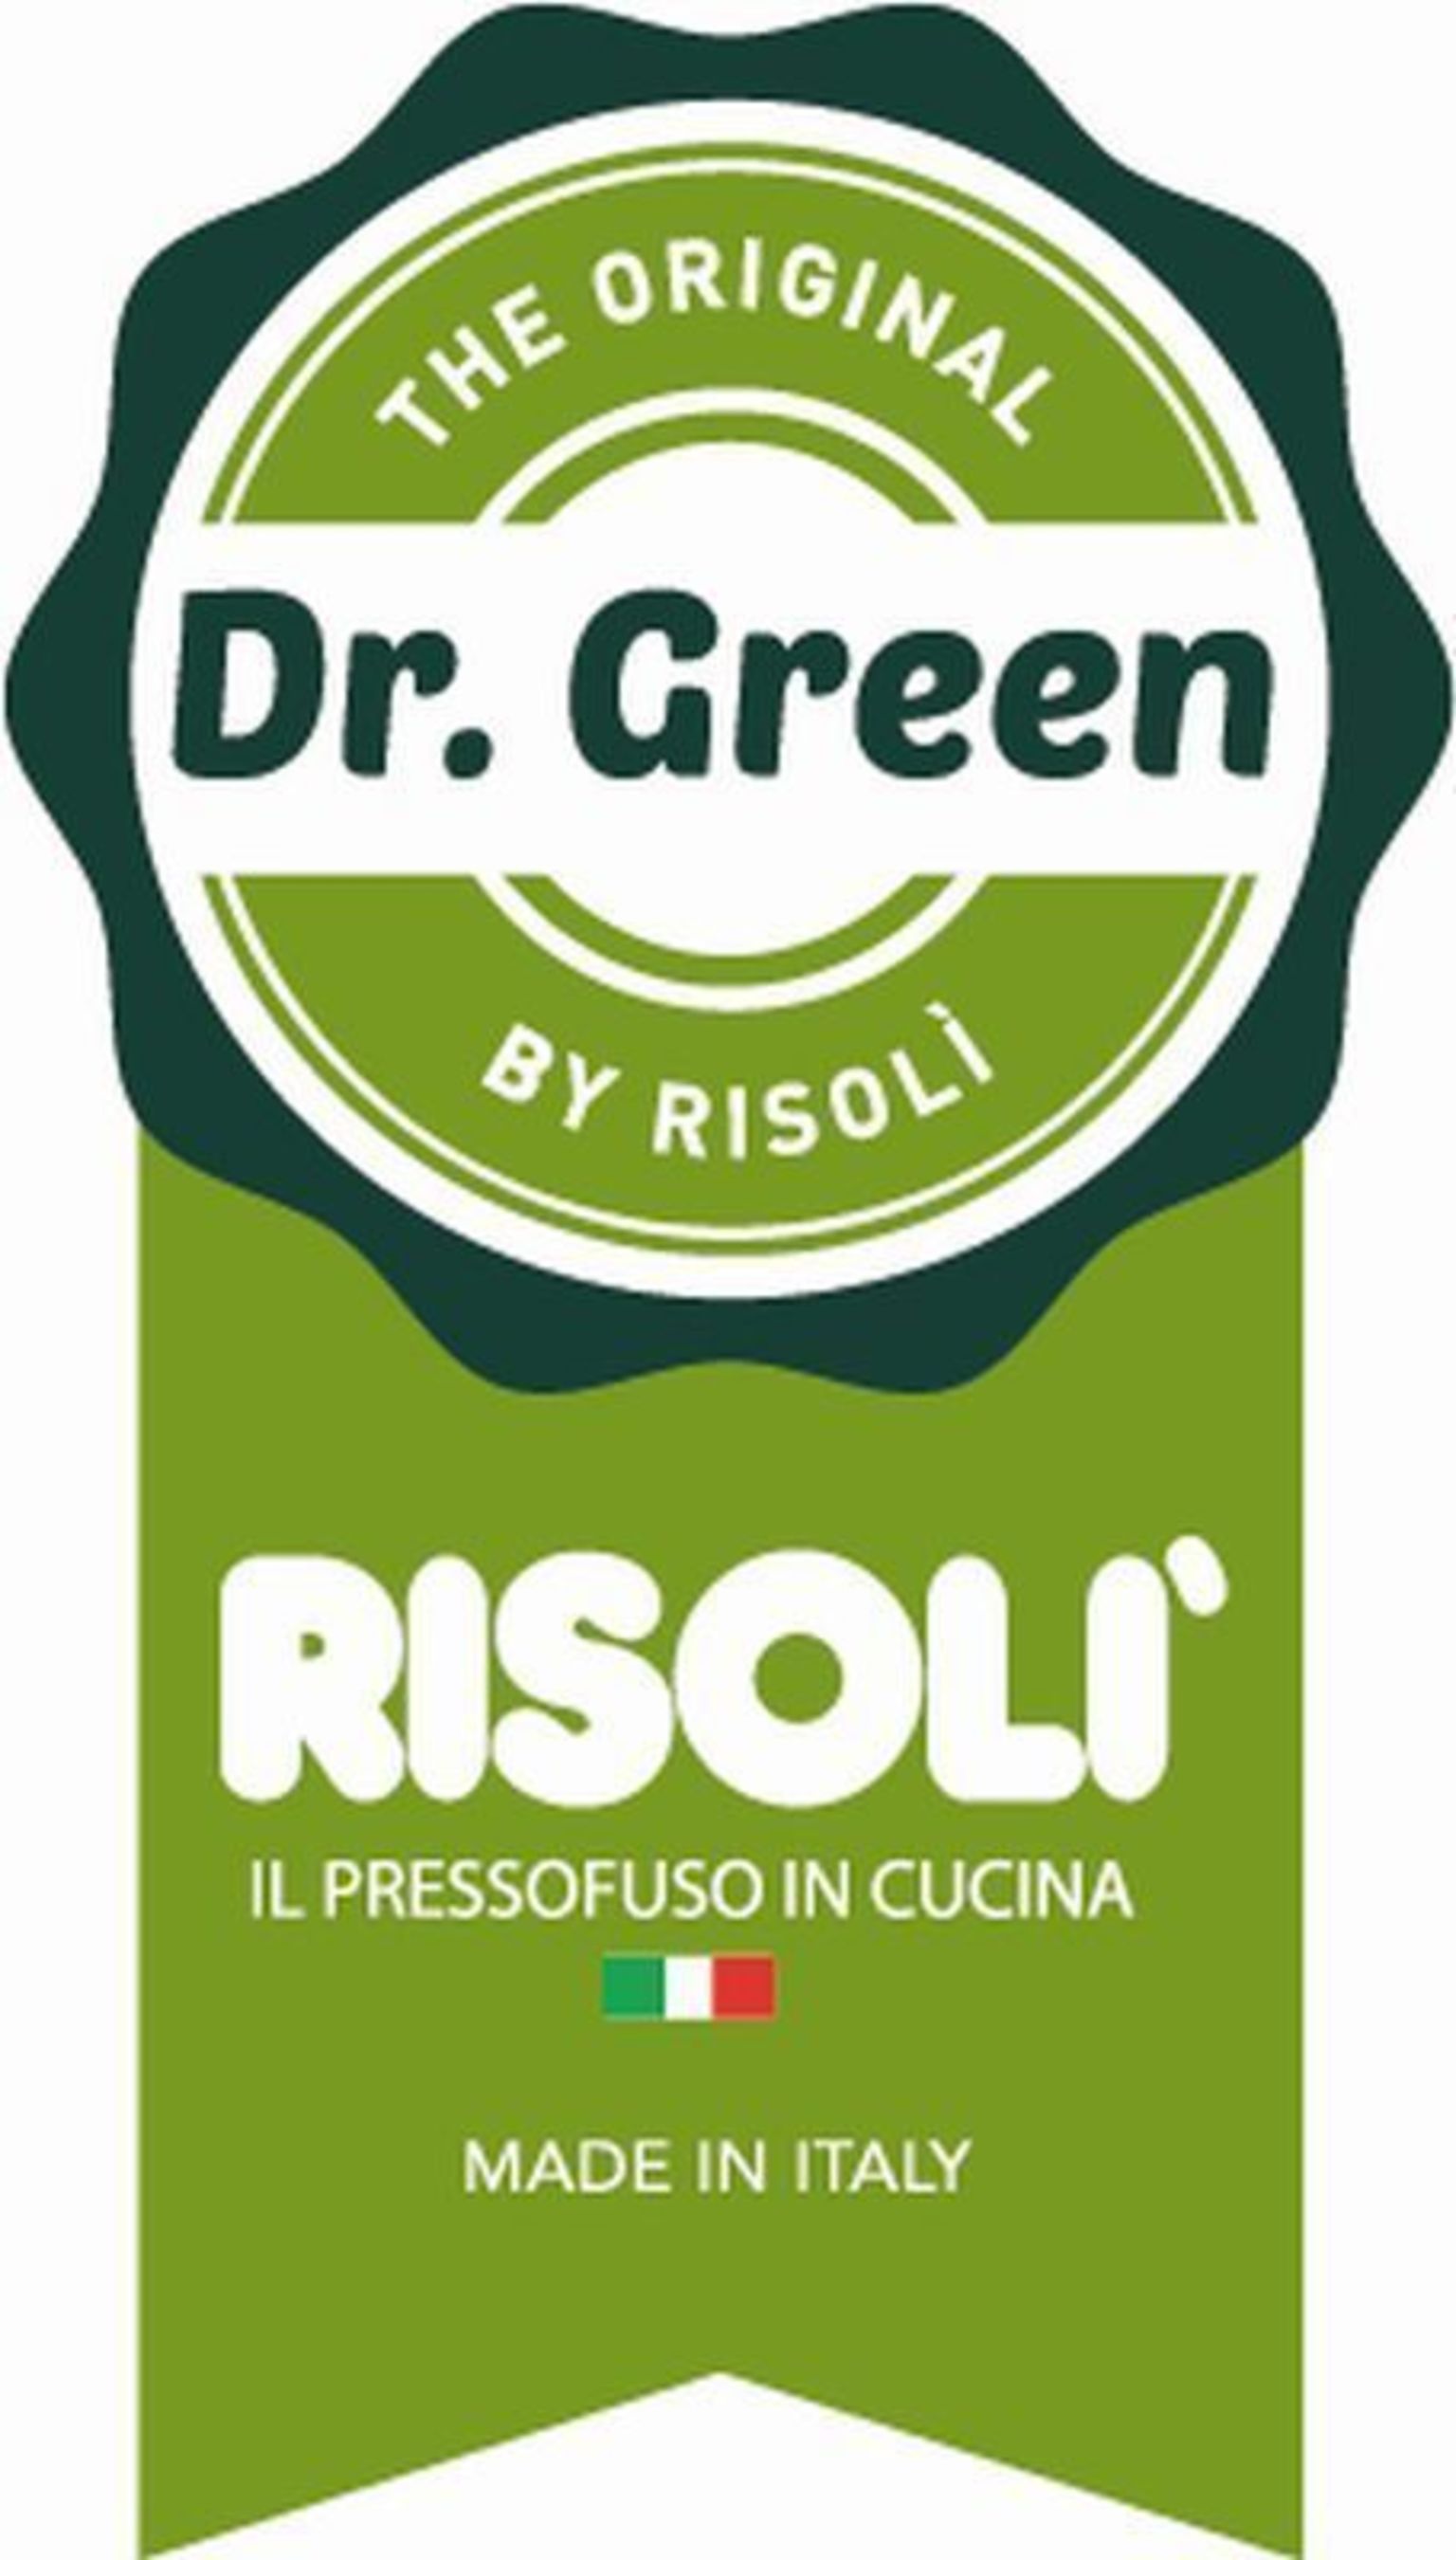 RISOLI', is Confirmed Leader of the Made in Italy at Ambiente in Frankfurt